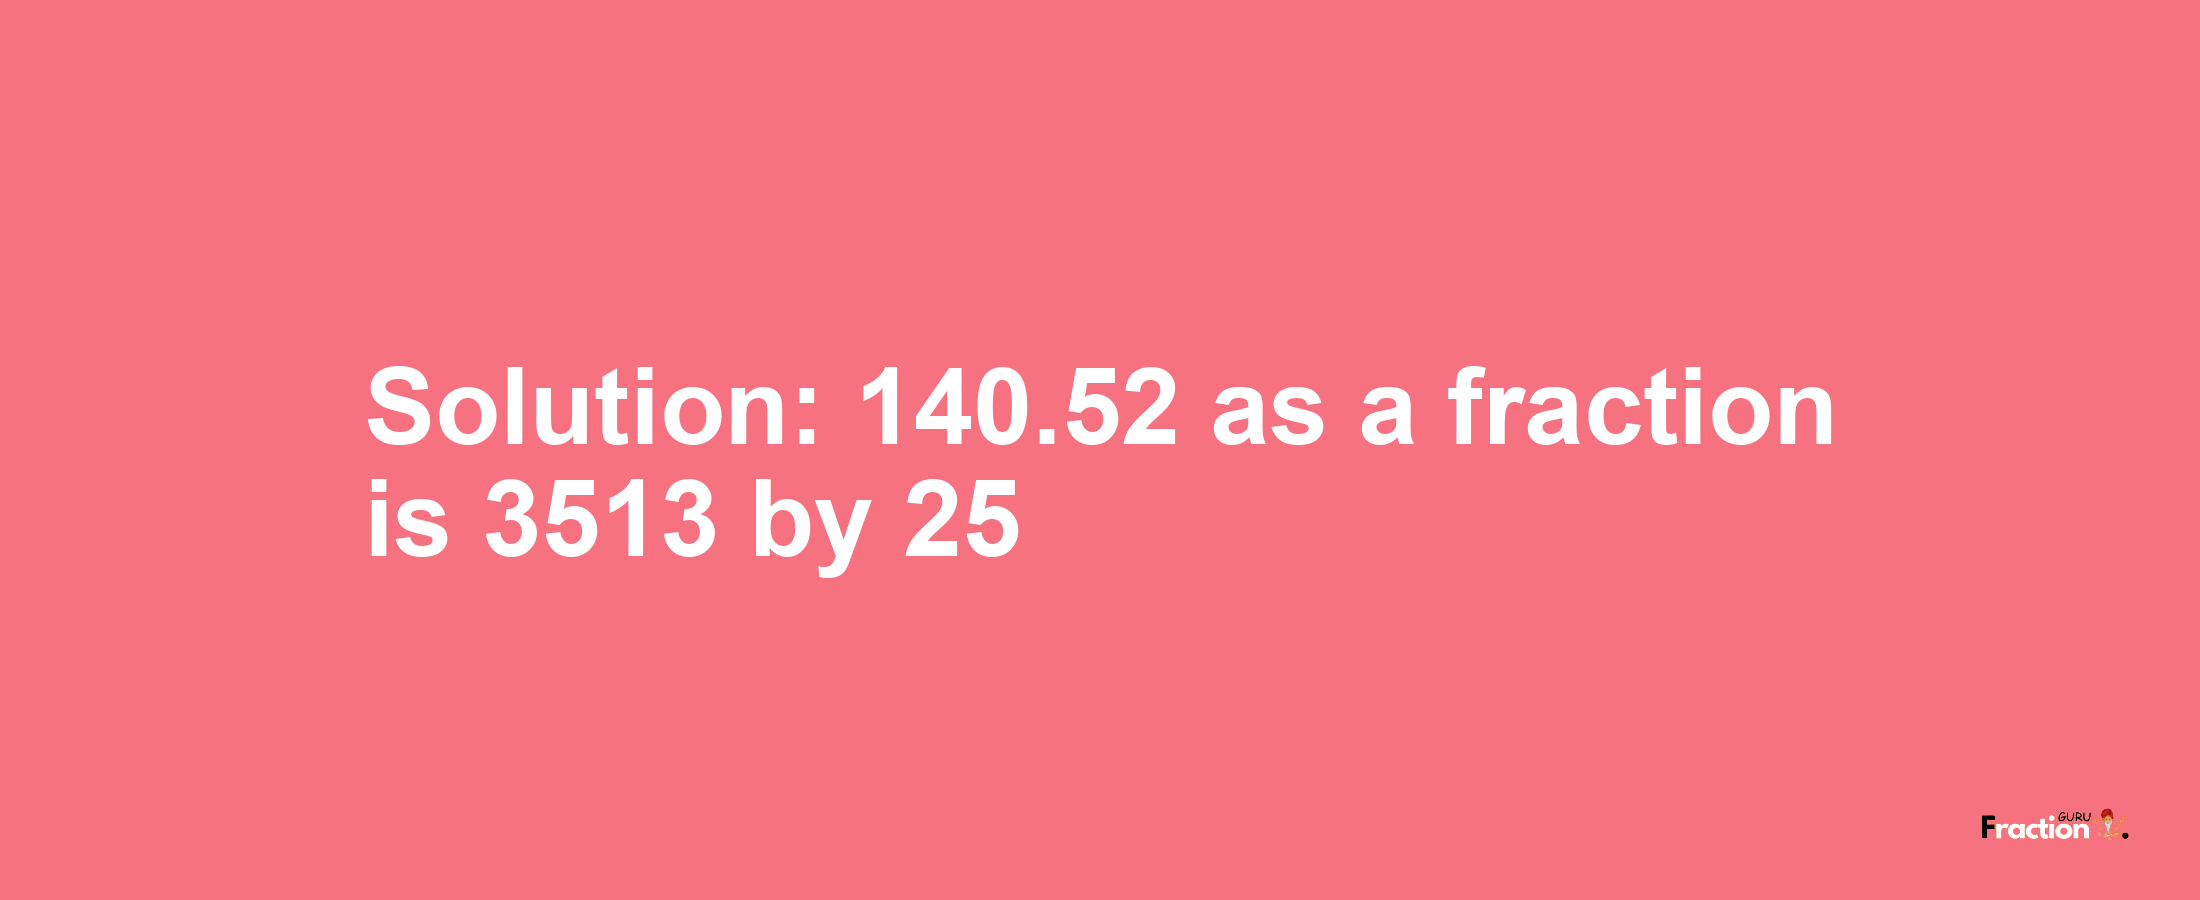 Solution:140.52 as a fraction is 3513/25